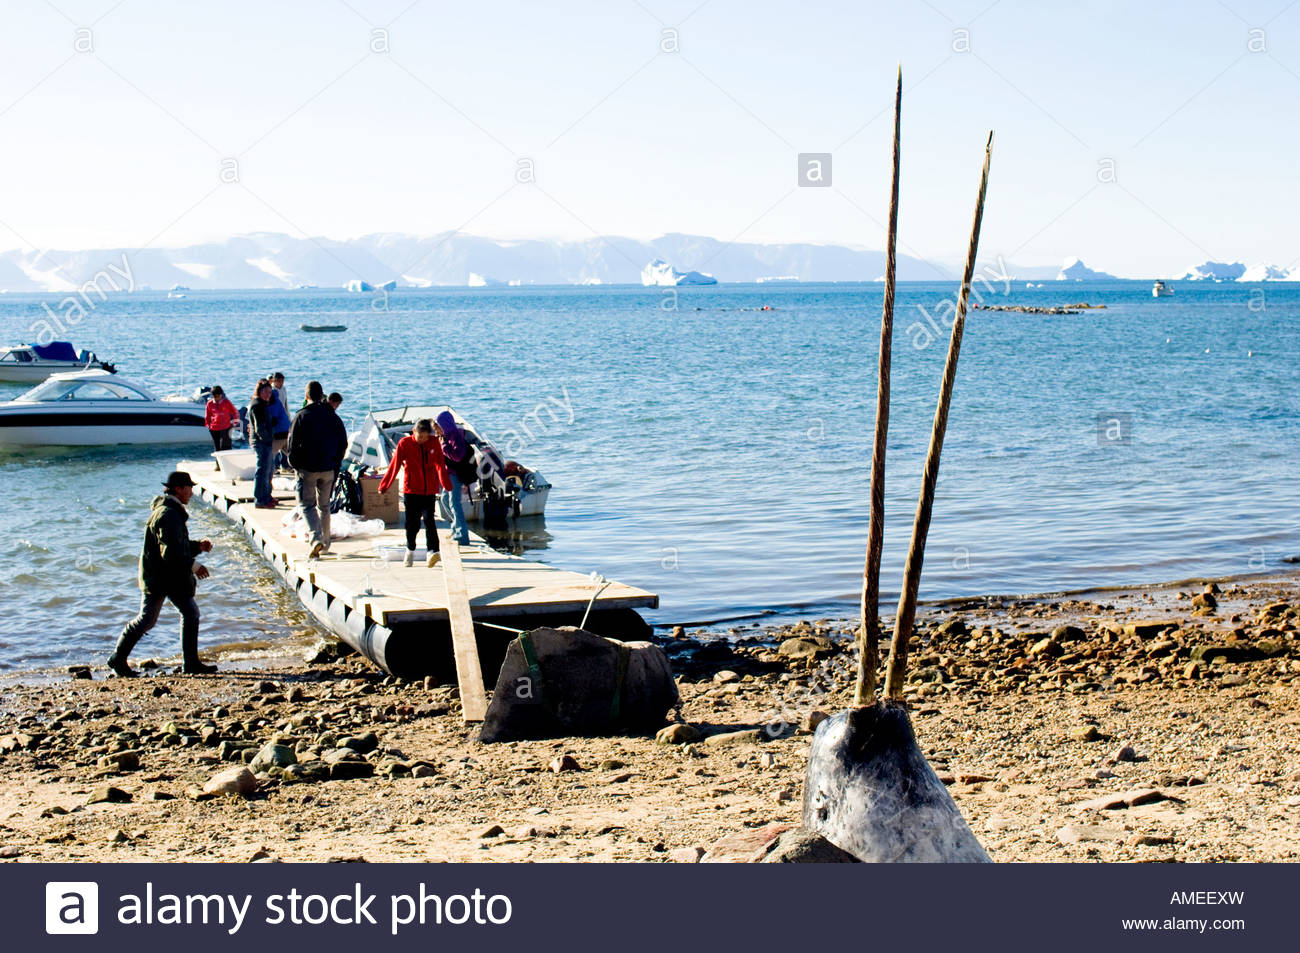 rare-double-tusked-narwhal-displayed-on-the-beach-after-being-hunted-AMEEXW.jpg